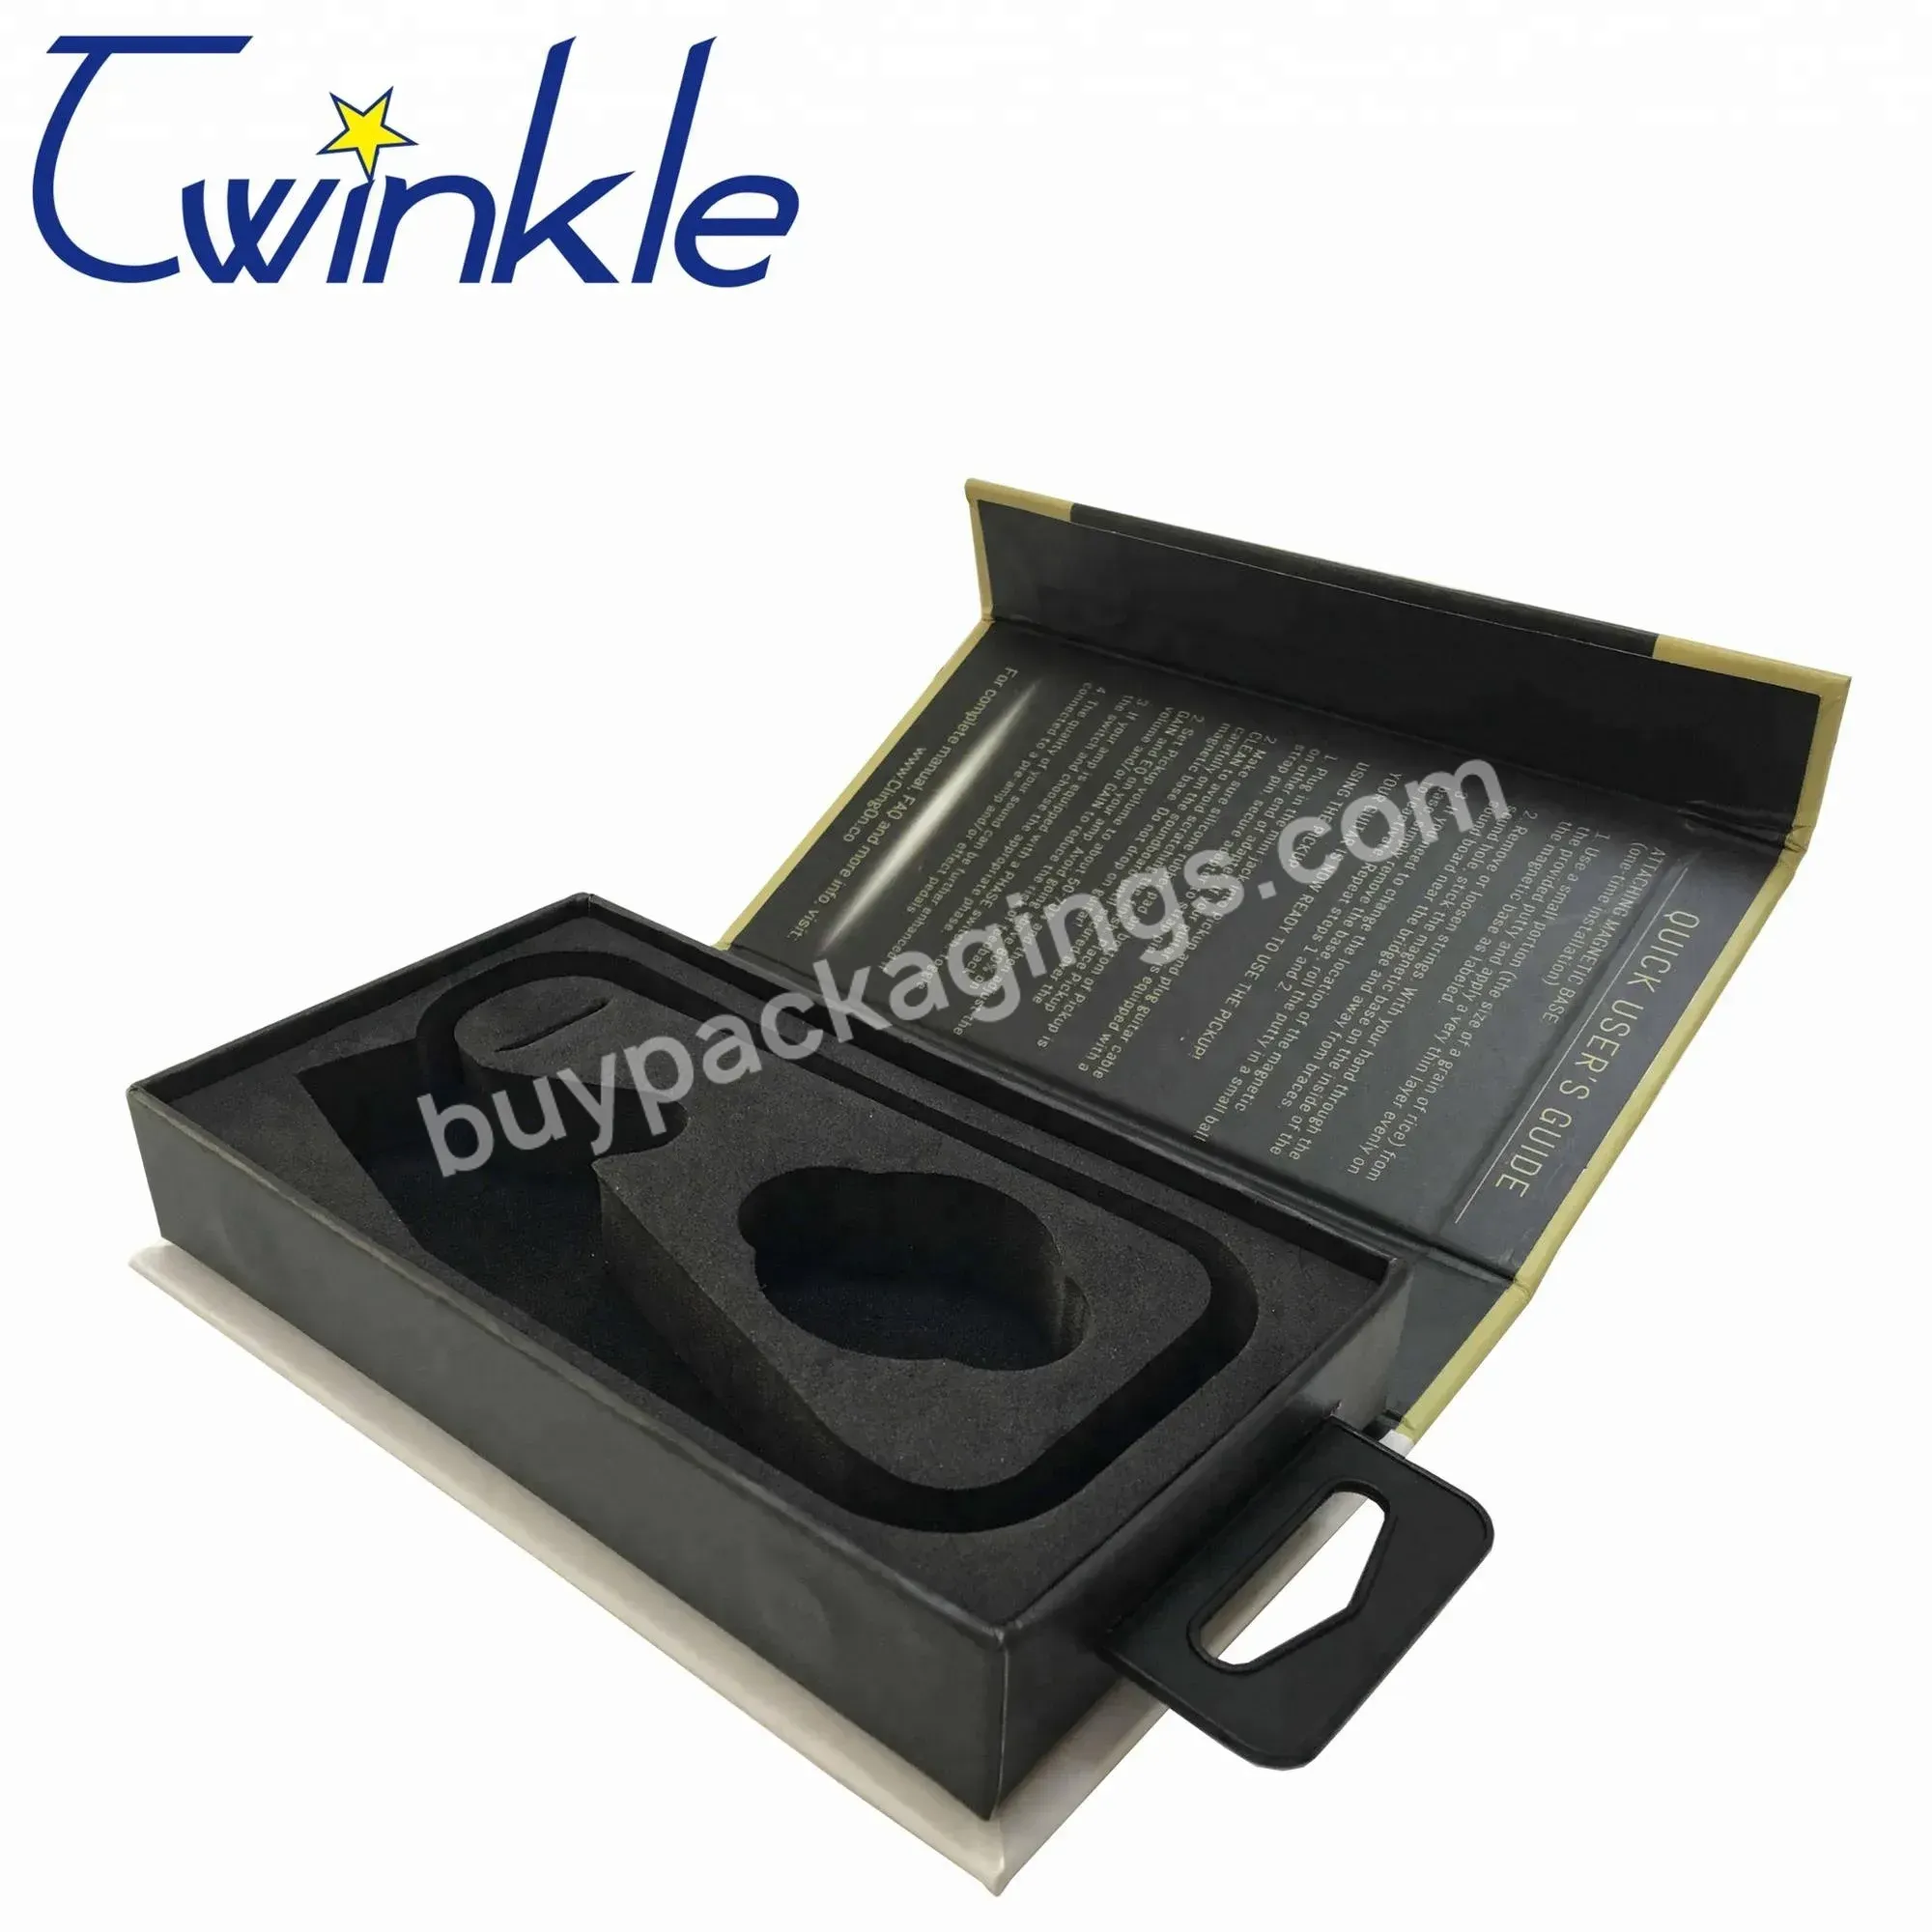 Cute Design Rigid Box Packaging With Strong Quality - Buy Rigid Box Packaging,Cute Design Rigid Box Packaging,Rigid Box Packaging With Strong Quality.